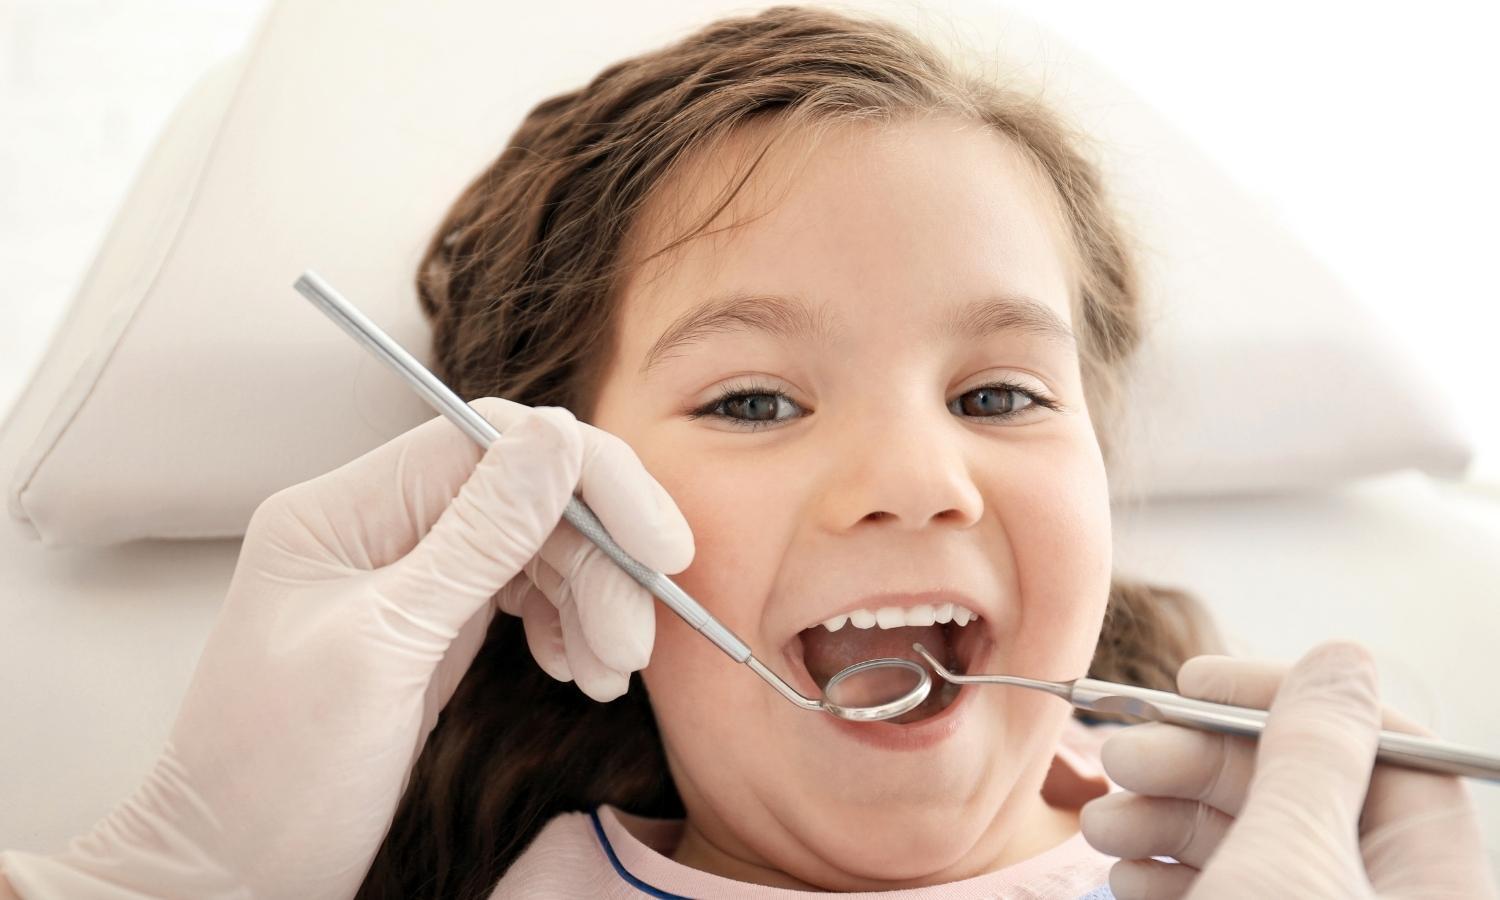 When a Child Loses a Permanent Tooth